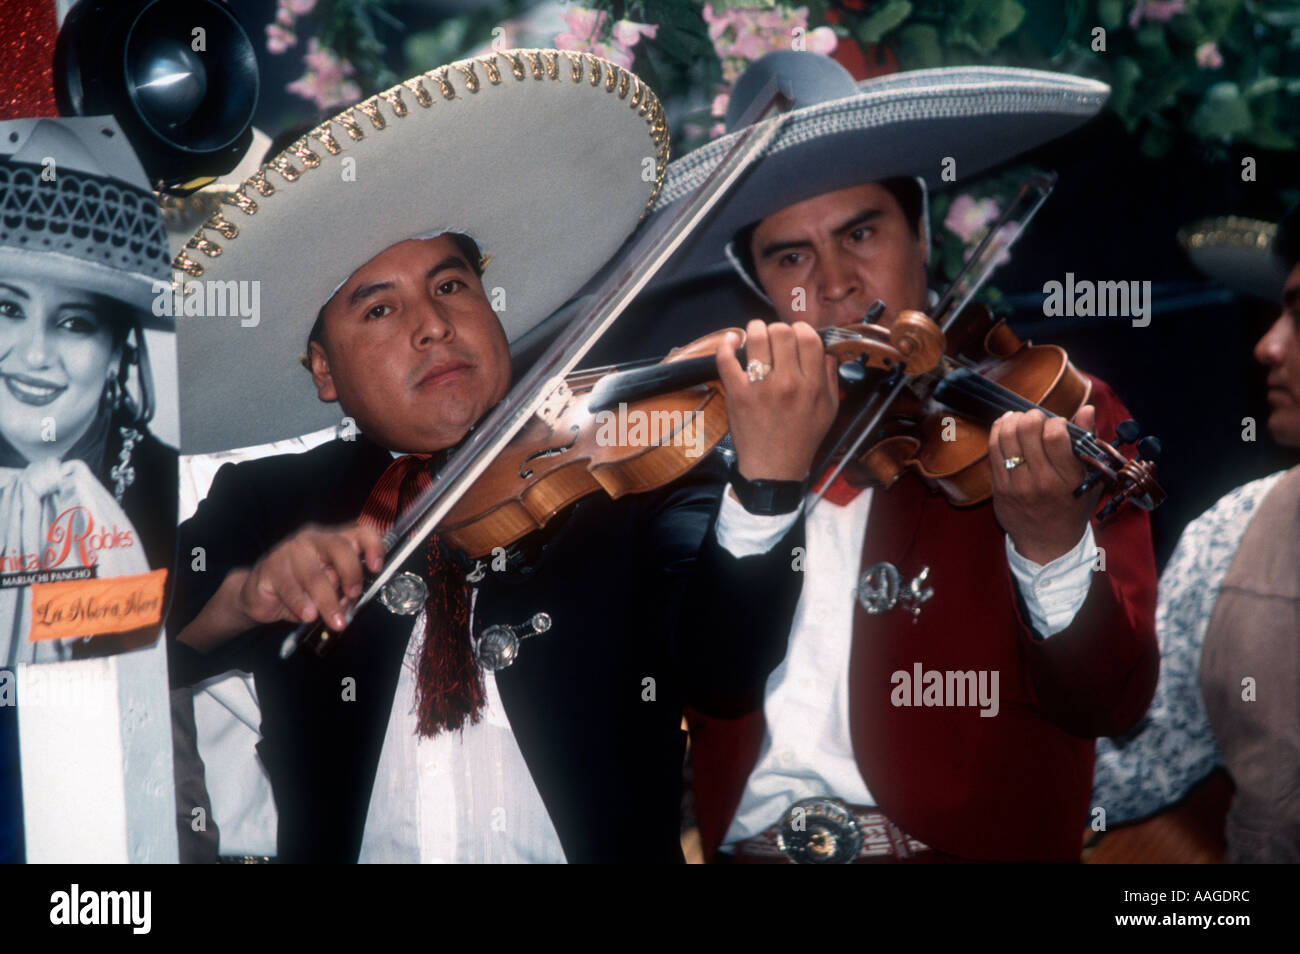 Violin players in a Mariachi band Stock Photo